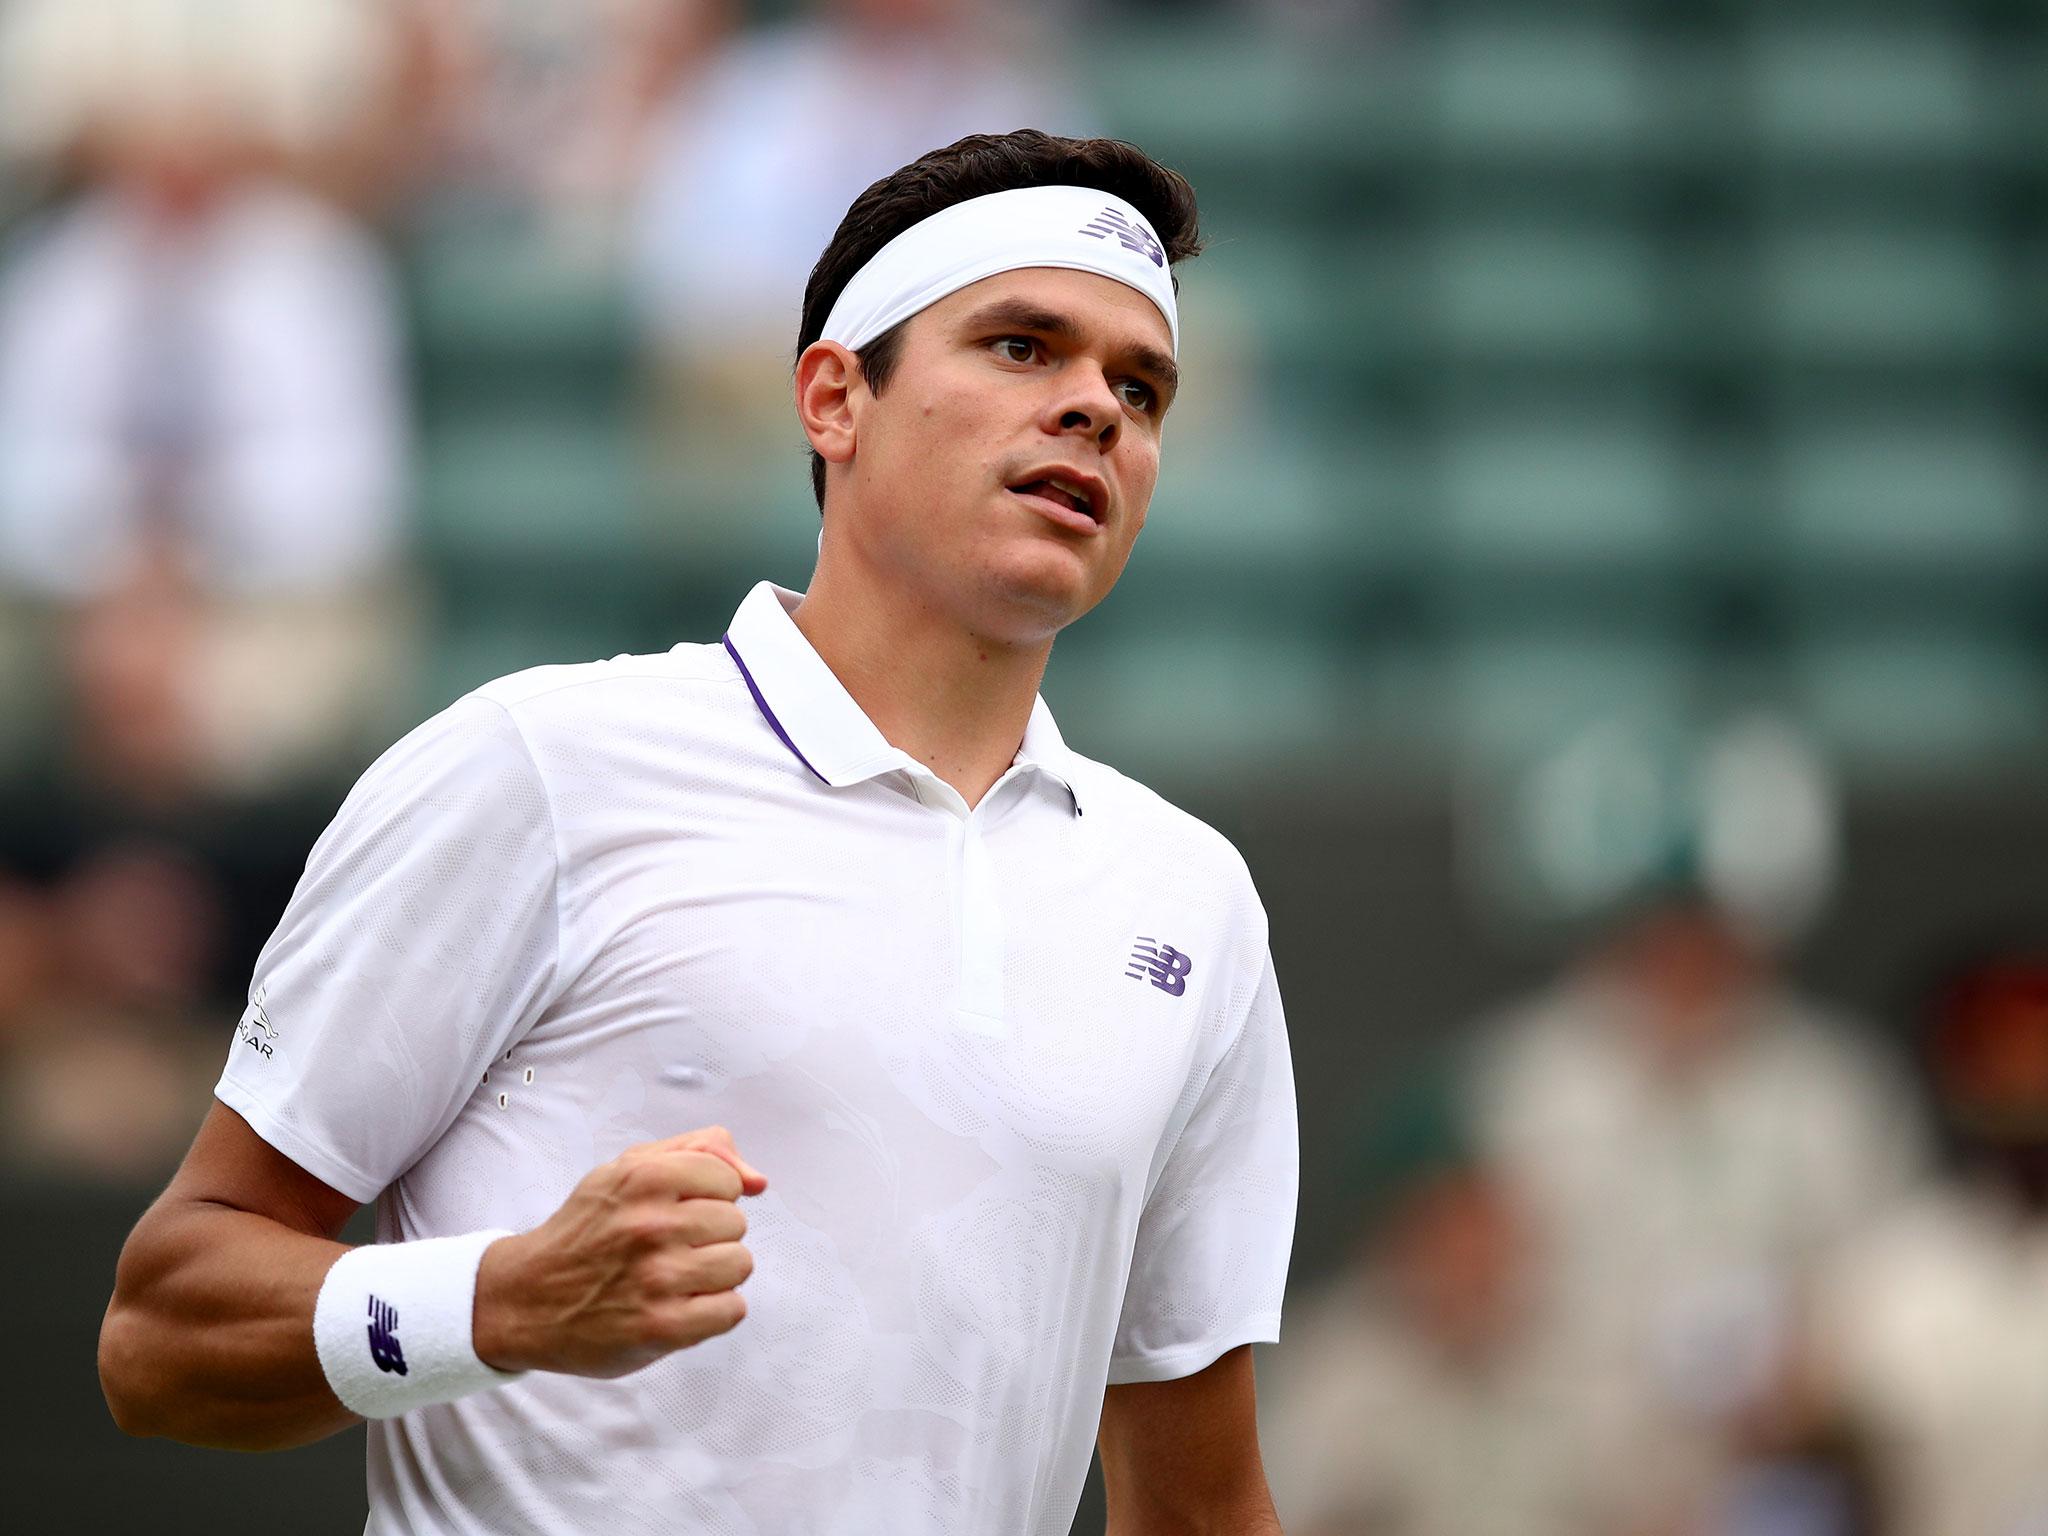 Wimbledon finalist Milos Raonic is out of the US Open